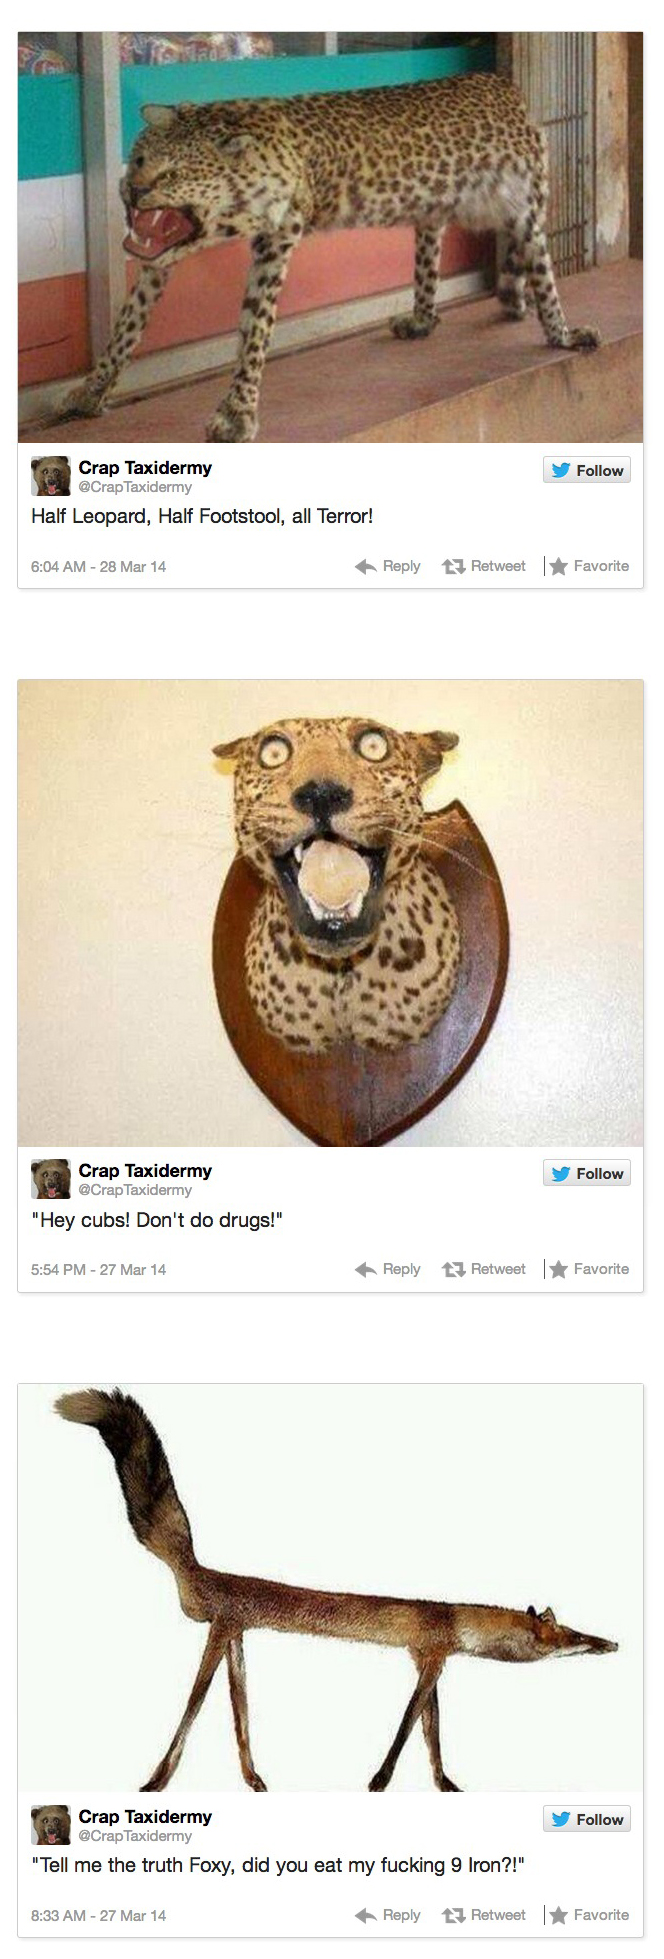 combined-crap-taxidermy-4